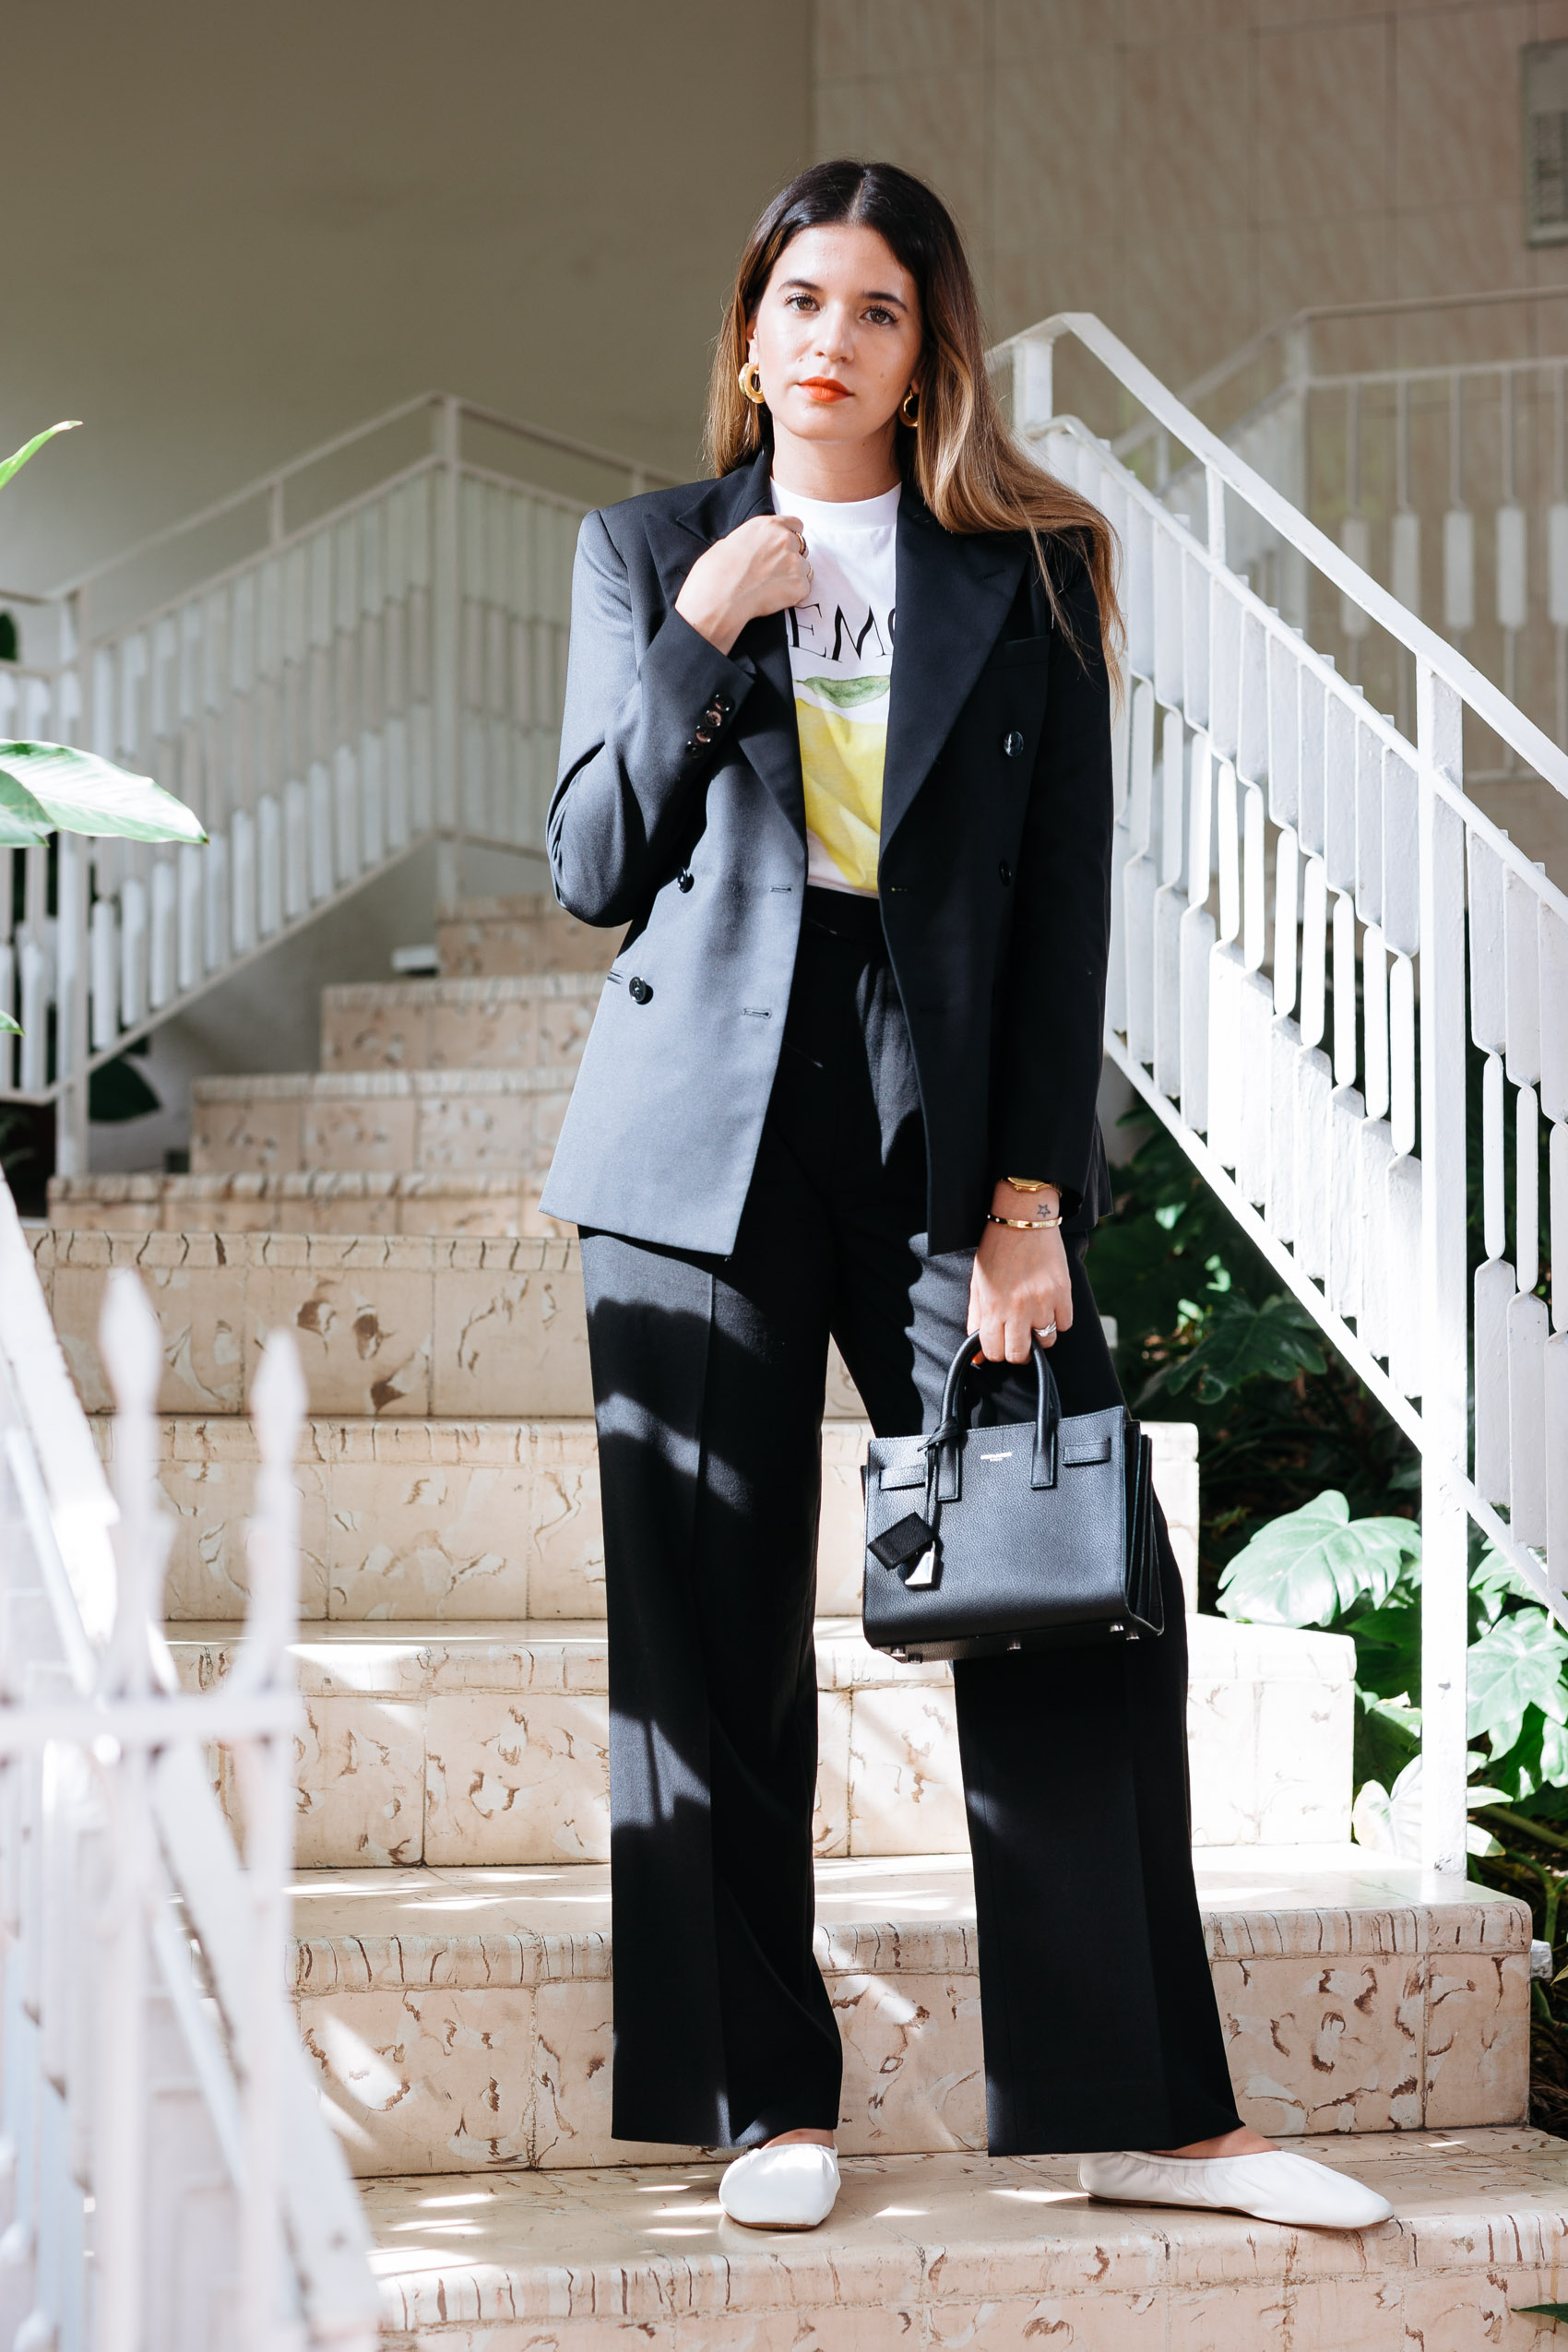 Maristella wears the Ganni lemon t-shirt with black trousers and double breasted blazer from Polo Ralph Lauren, Céline white leather flats, black nano Sac de Jour from YSL